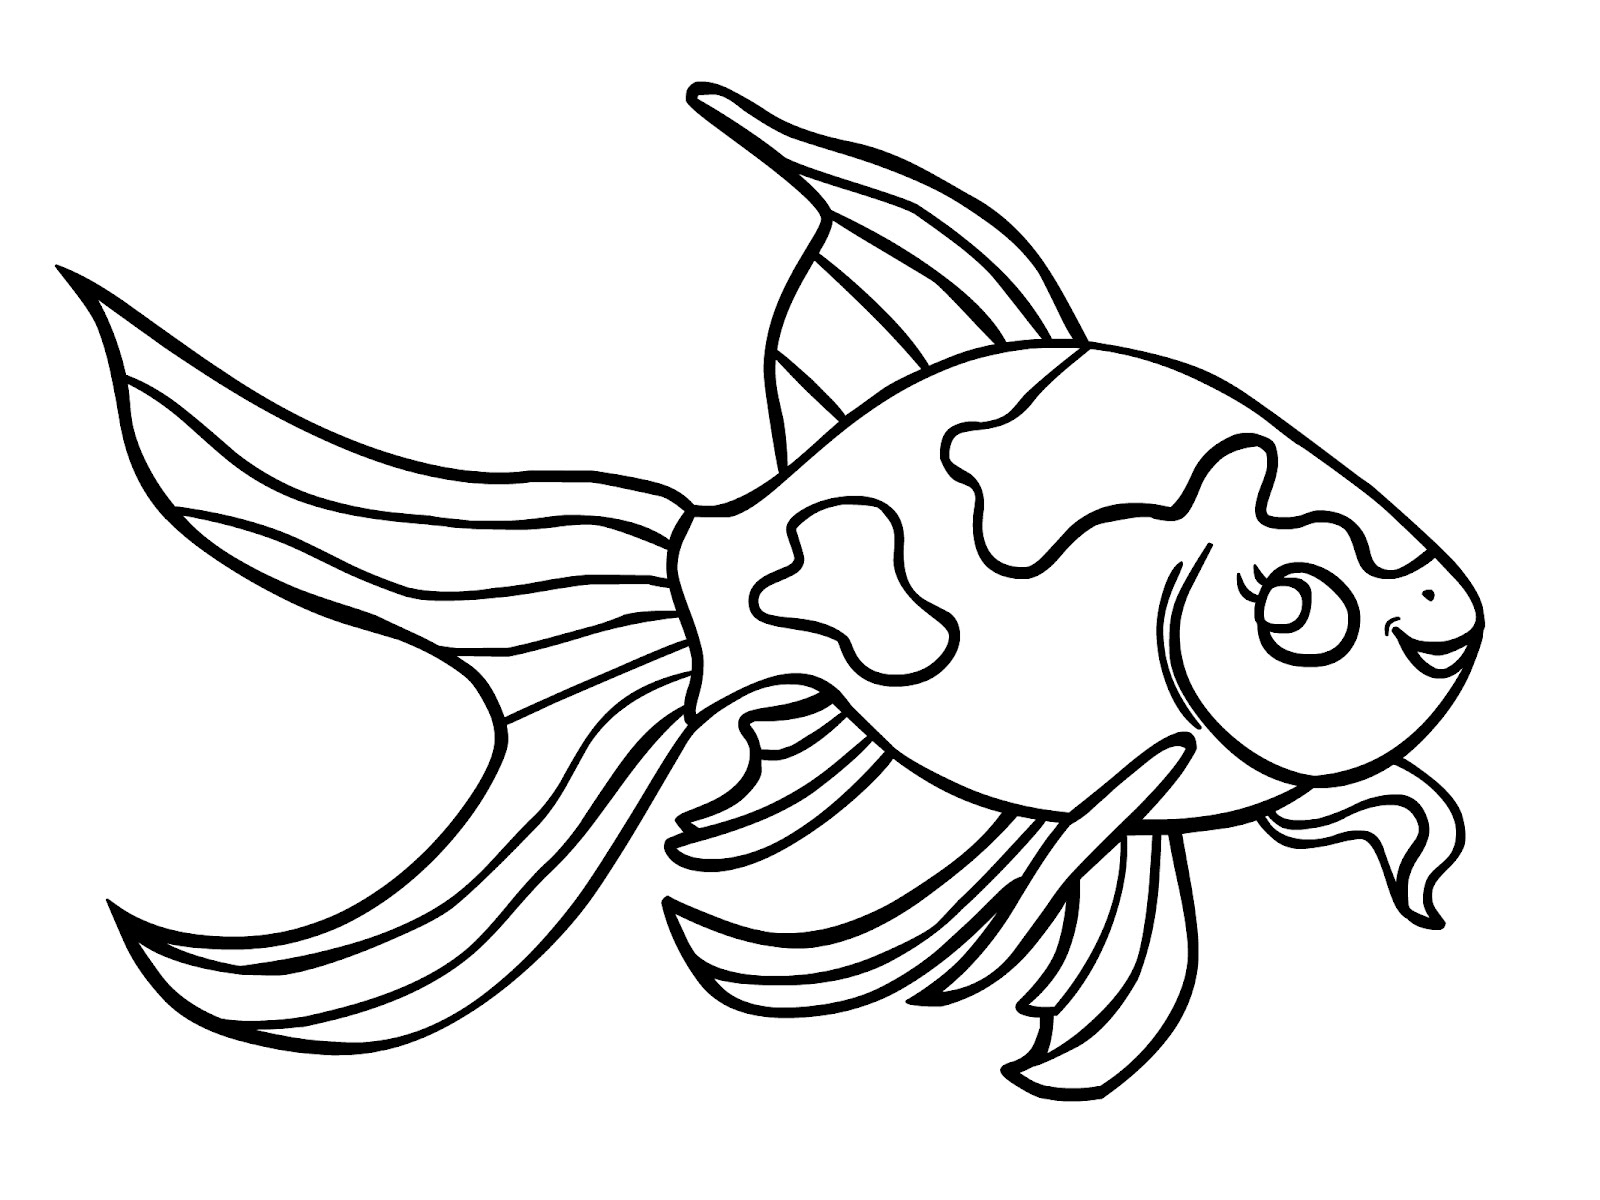 Printable Goldfish Coloring Pages | Coloringkids.co